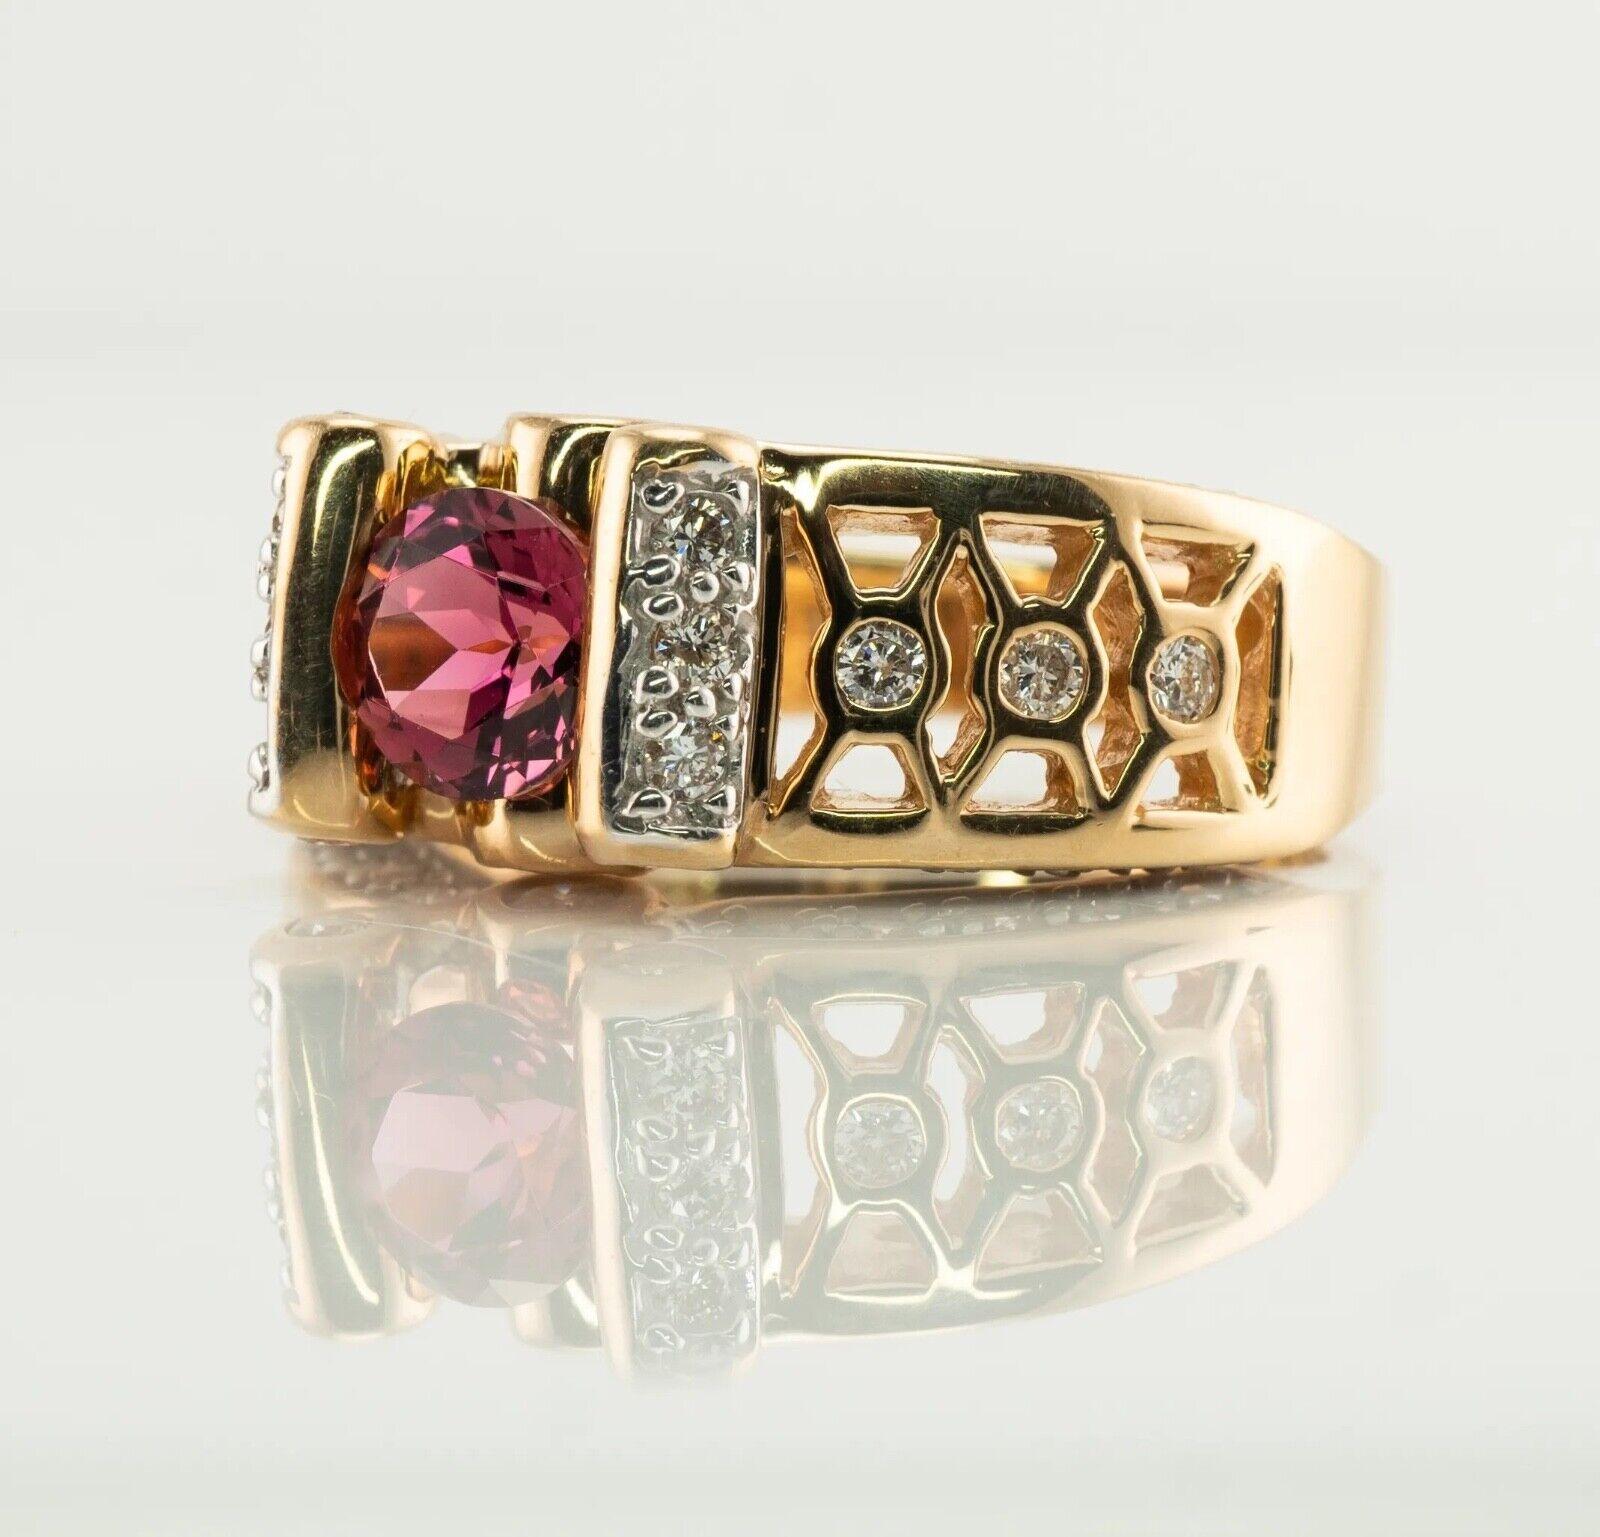 Diamond Pink Tourmaline Ring 14K Gold Band

This estate ring is finely crafted in solid 14K Yellow Gold and set with genuine Earth mined Pink Tourmaline and diamonds.
The Tourmaline is 6mm (.75ct) and this is a very clean gem of great intensity and